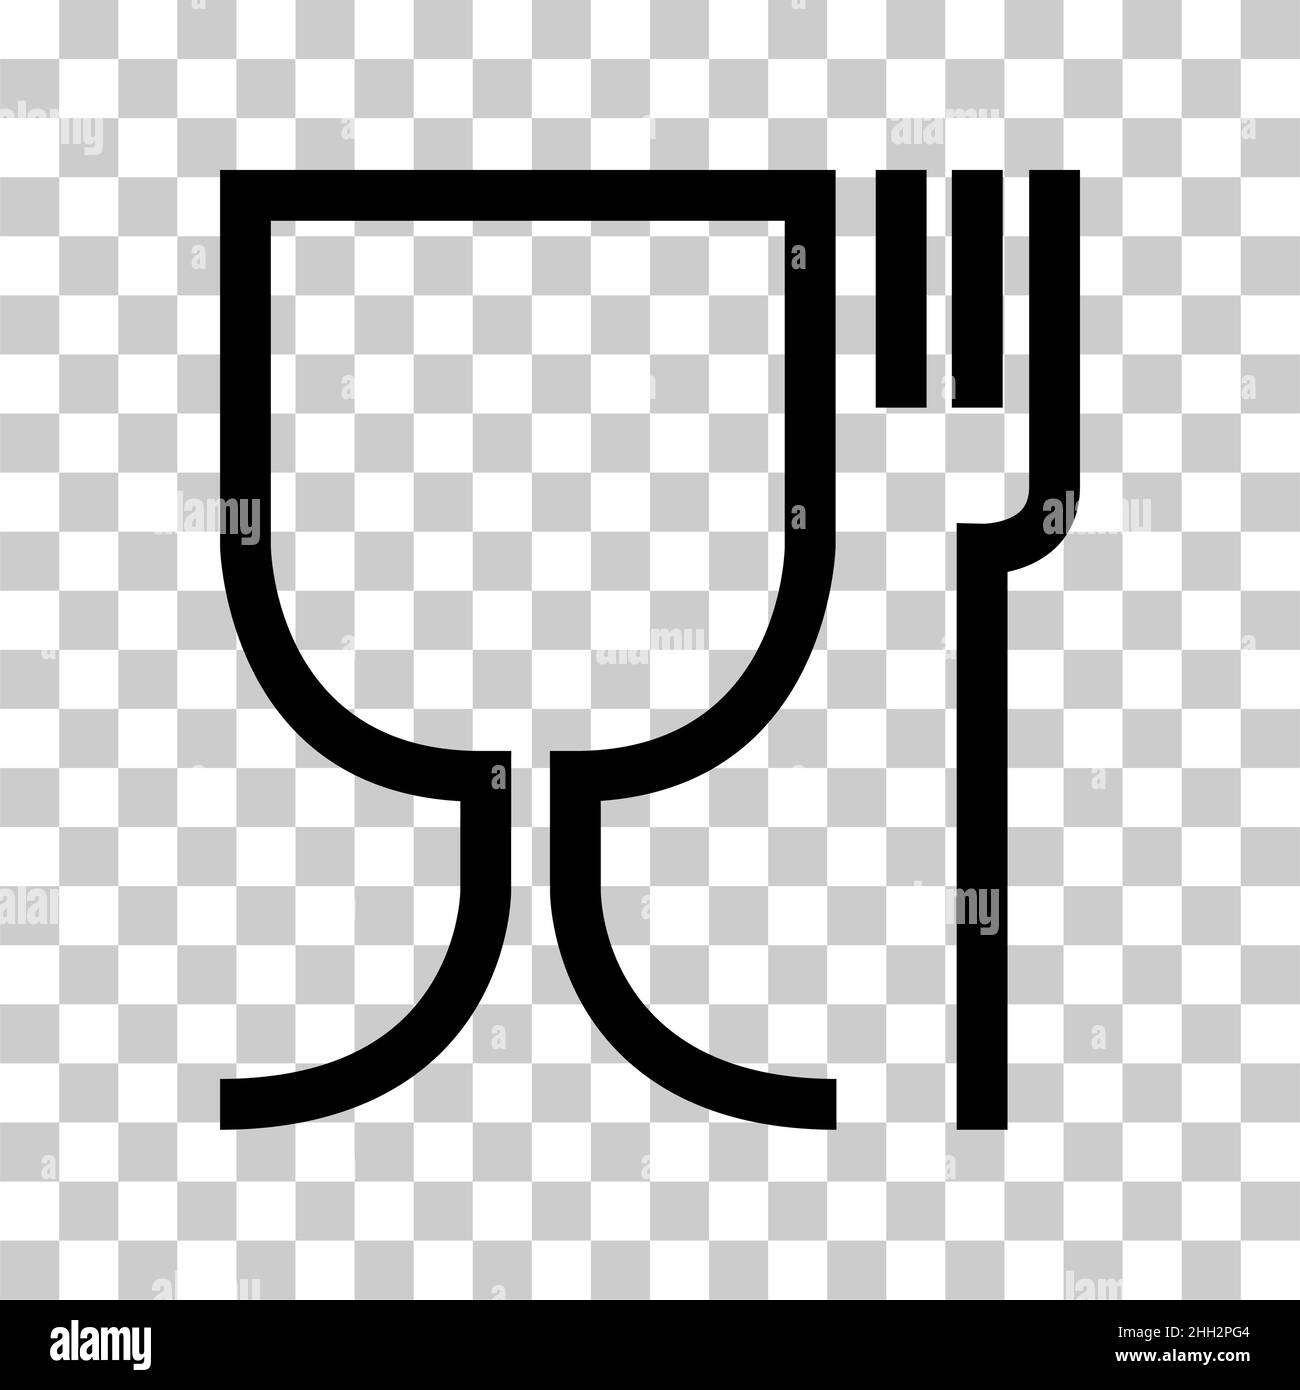 Food safe symbol. The international icon for food safe material, wine glass and a fork symbol . Stock Vector